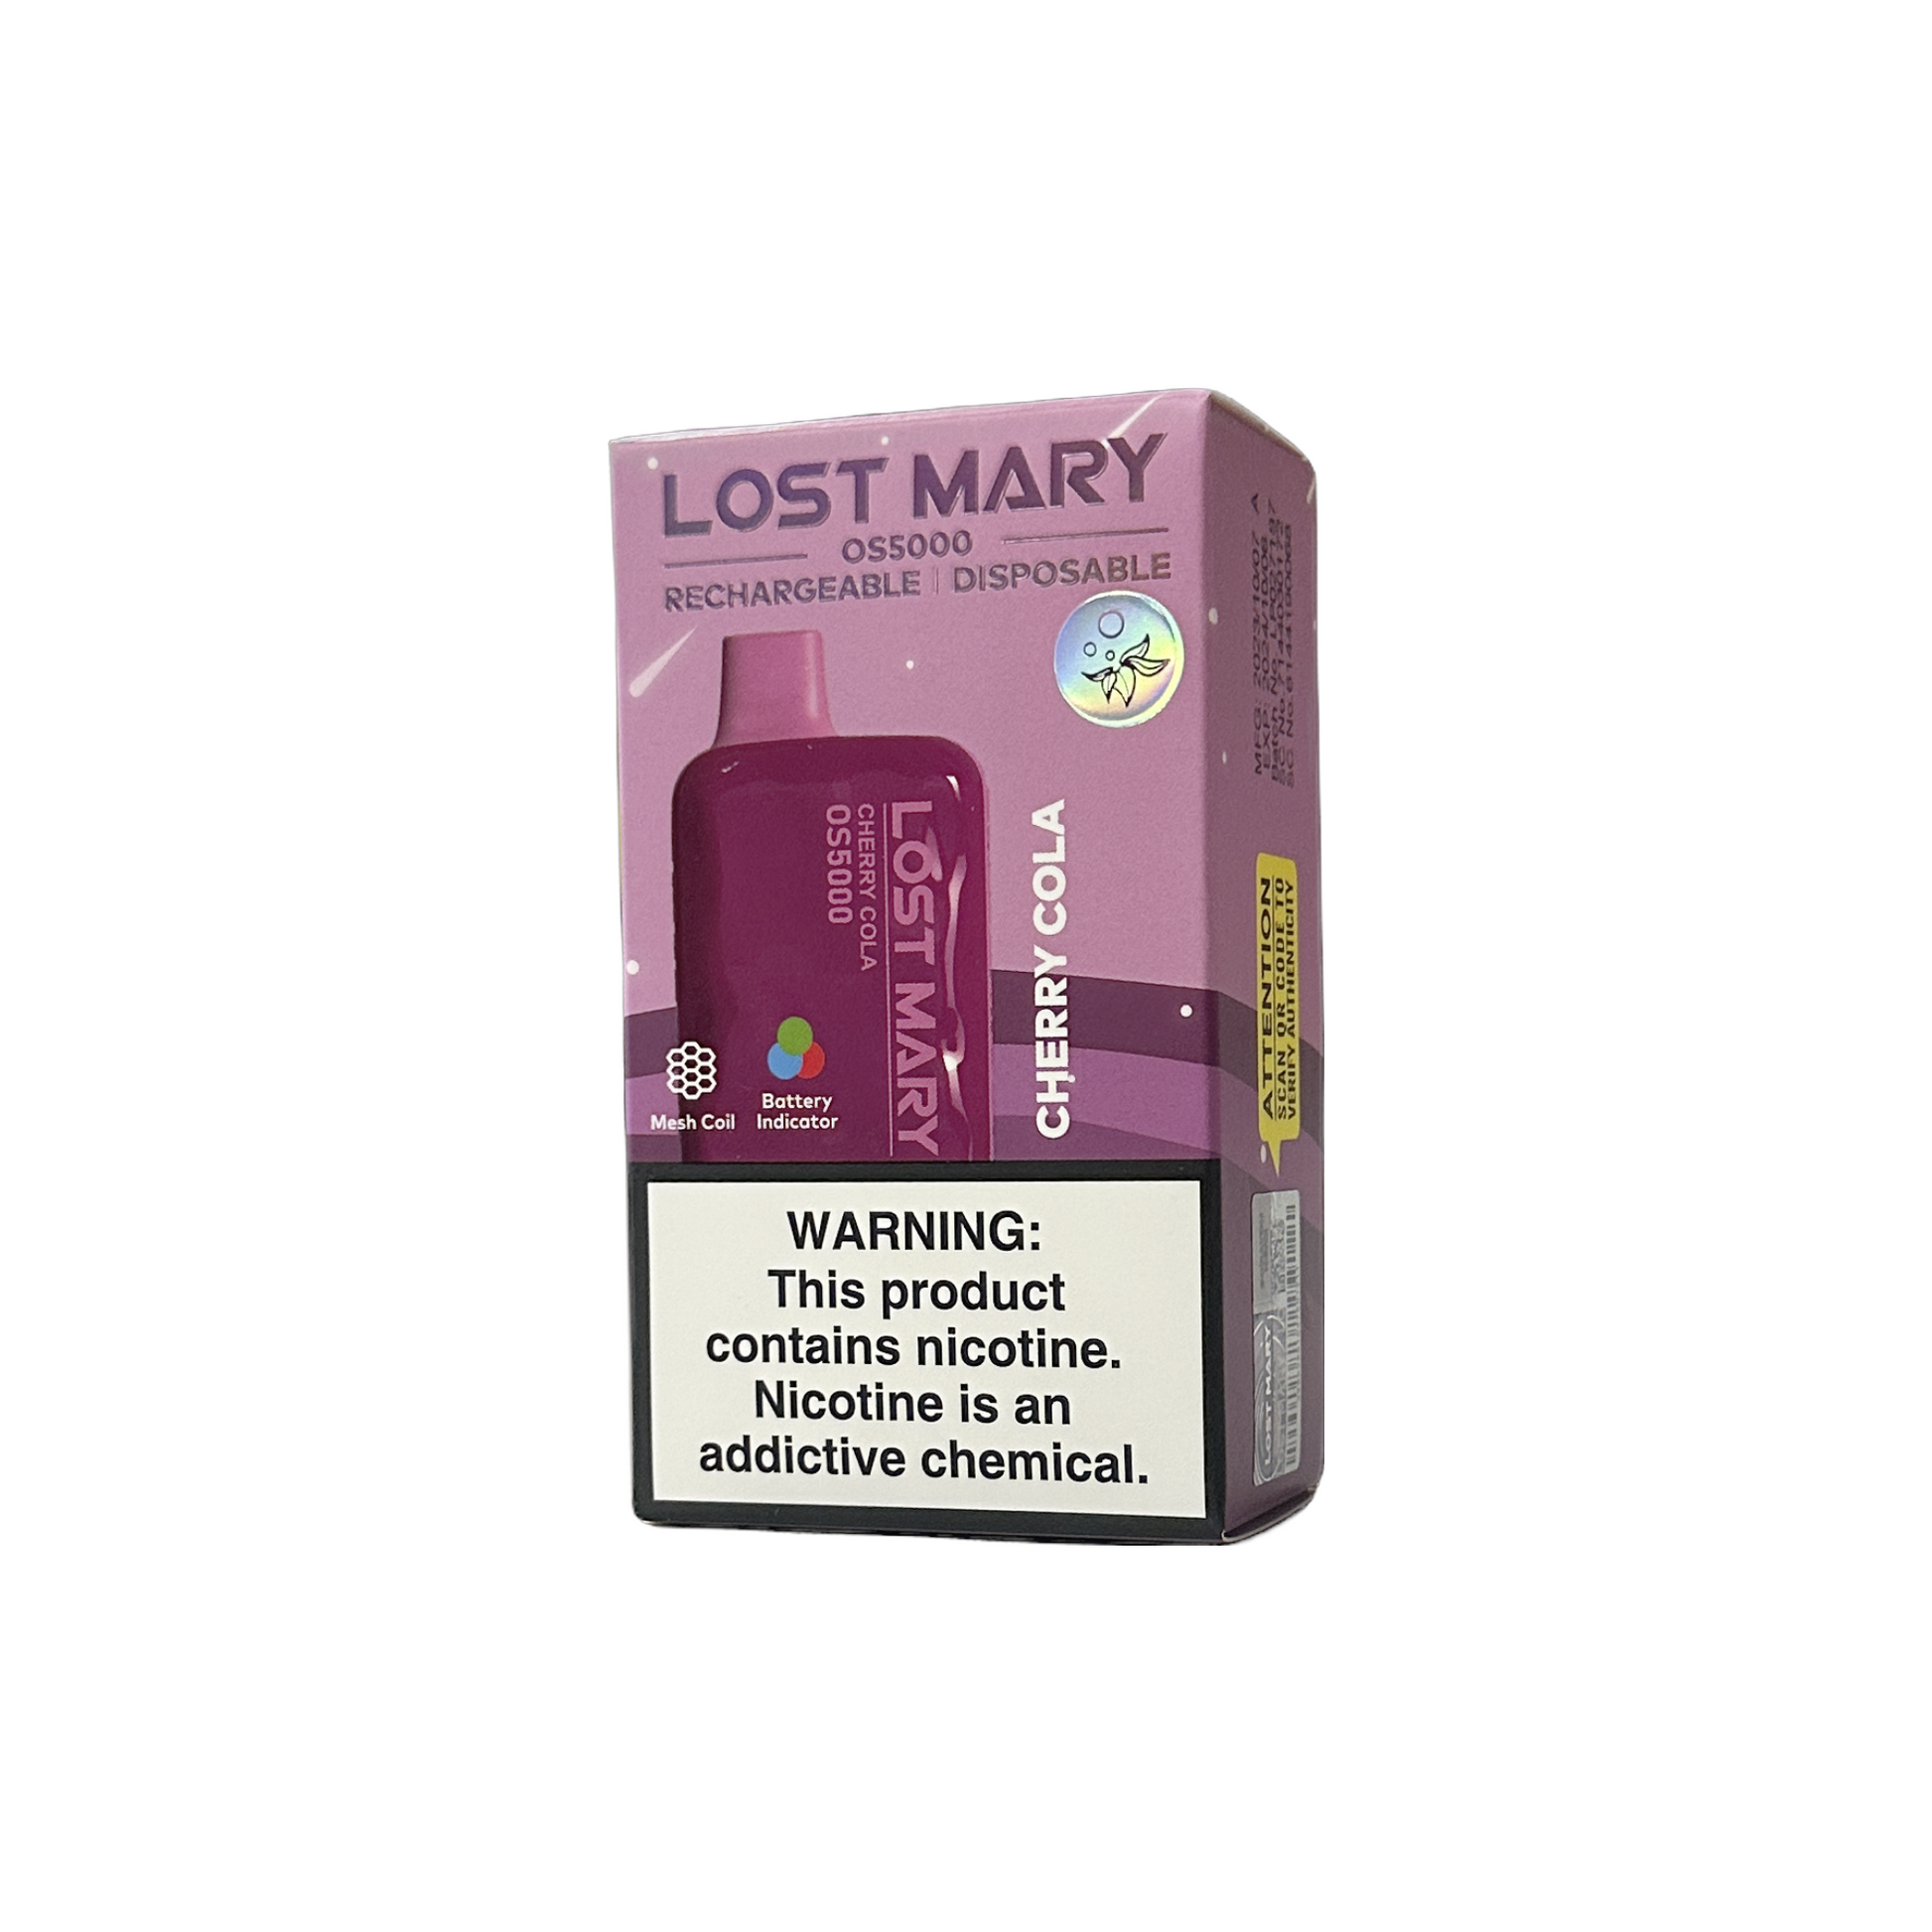 Lost Mary OS500 Cherry Cola